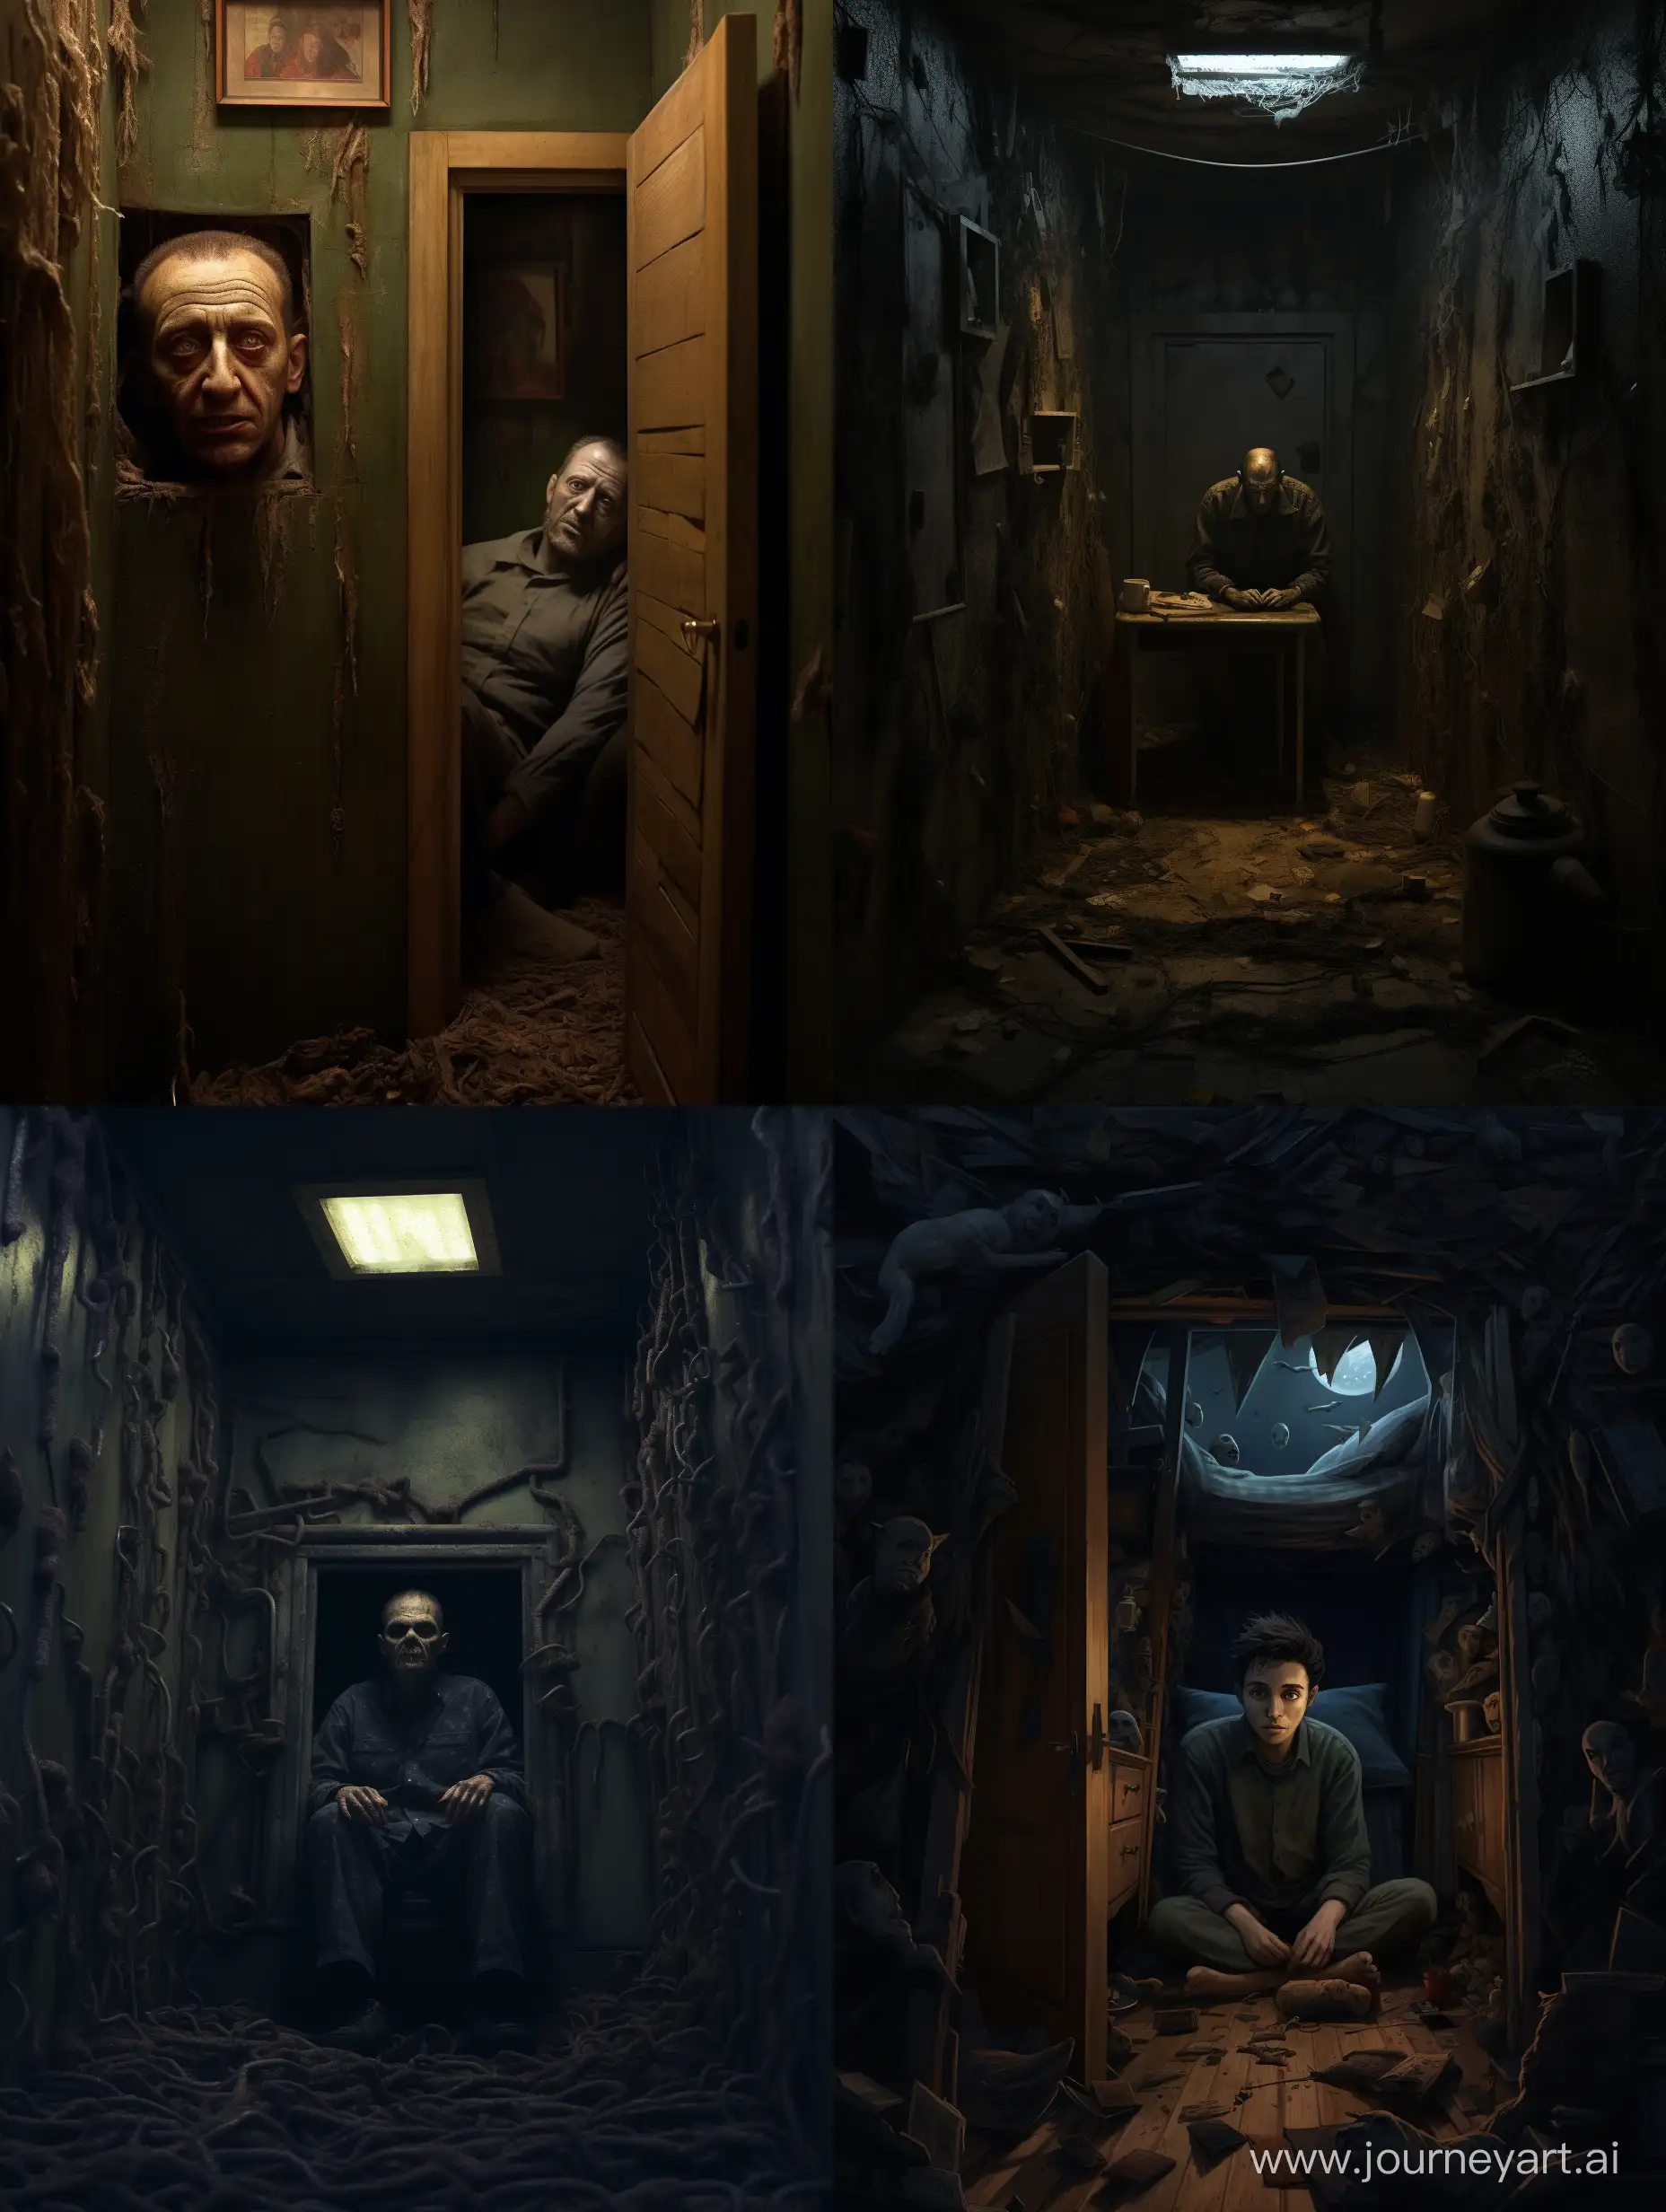 Intense-Horror-Claustrophobic-Man-Trapped-in-Diminutive-Room